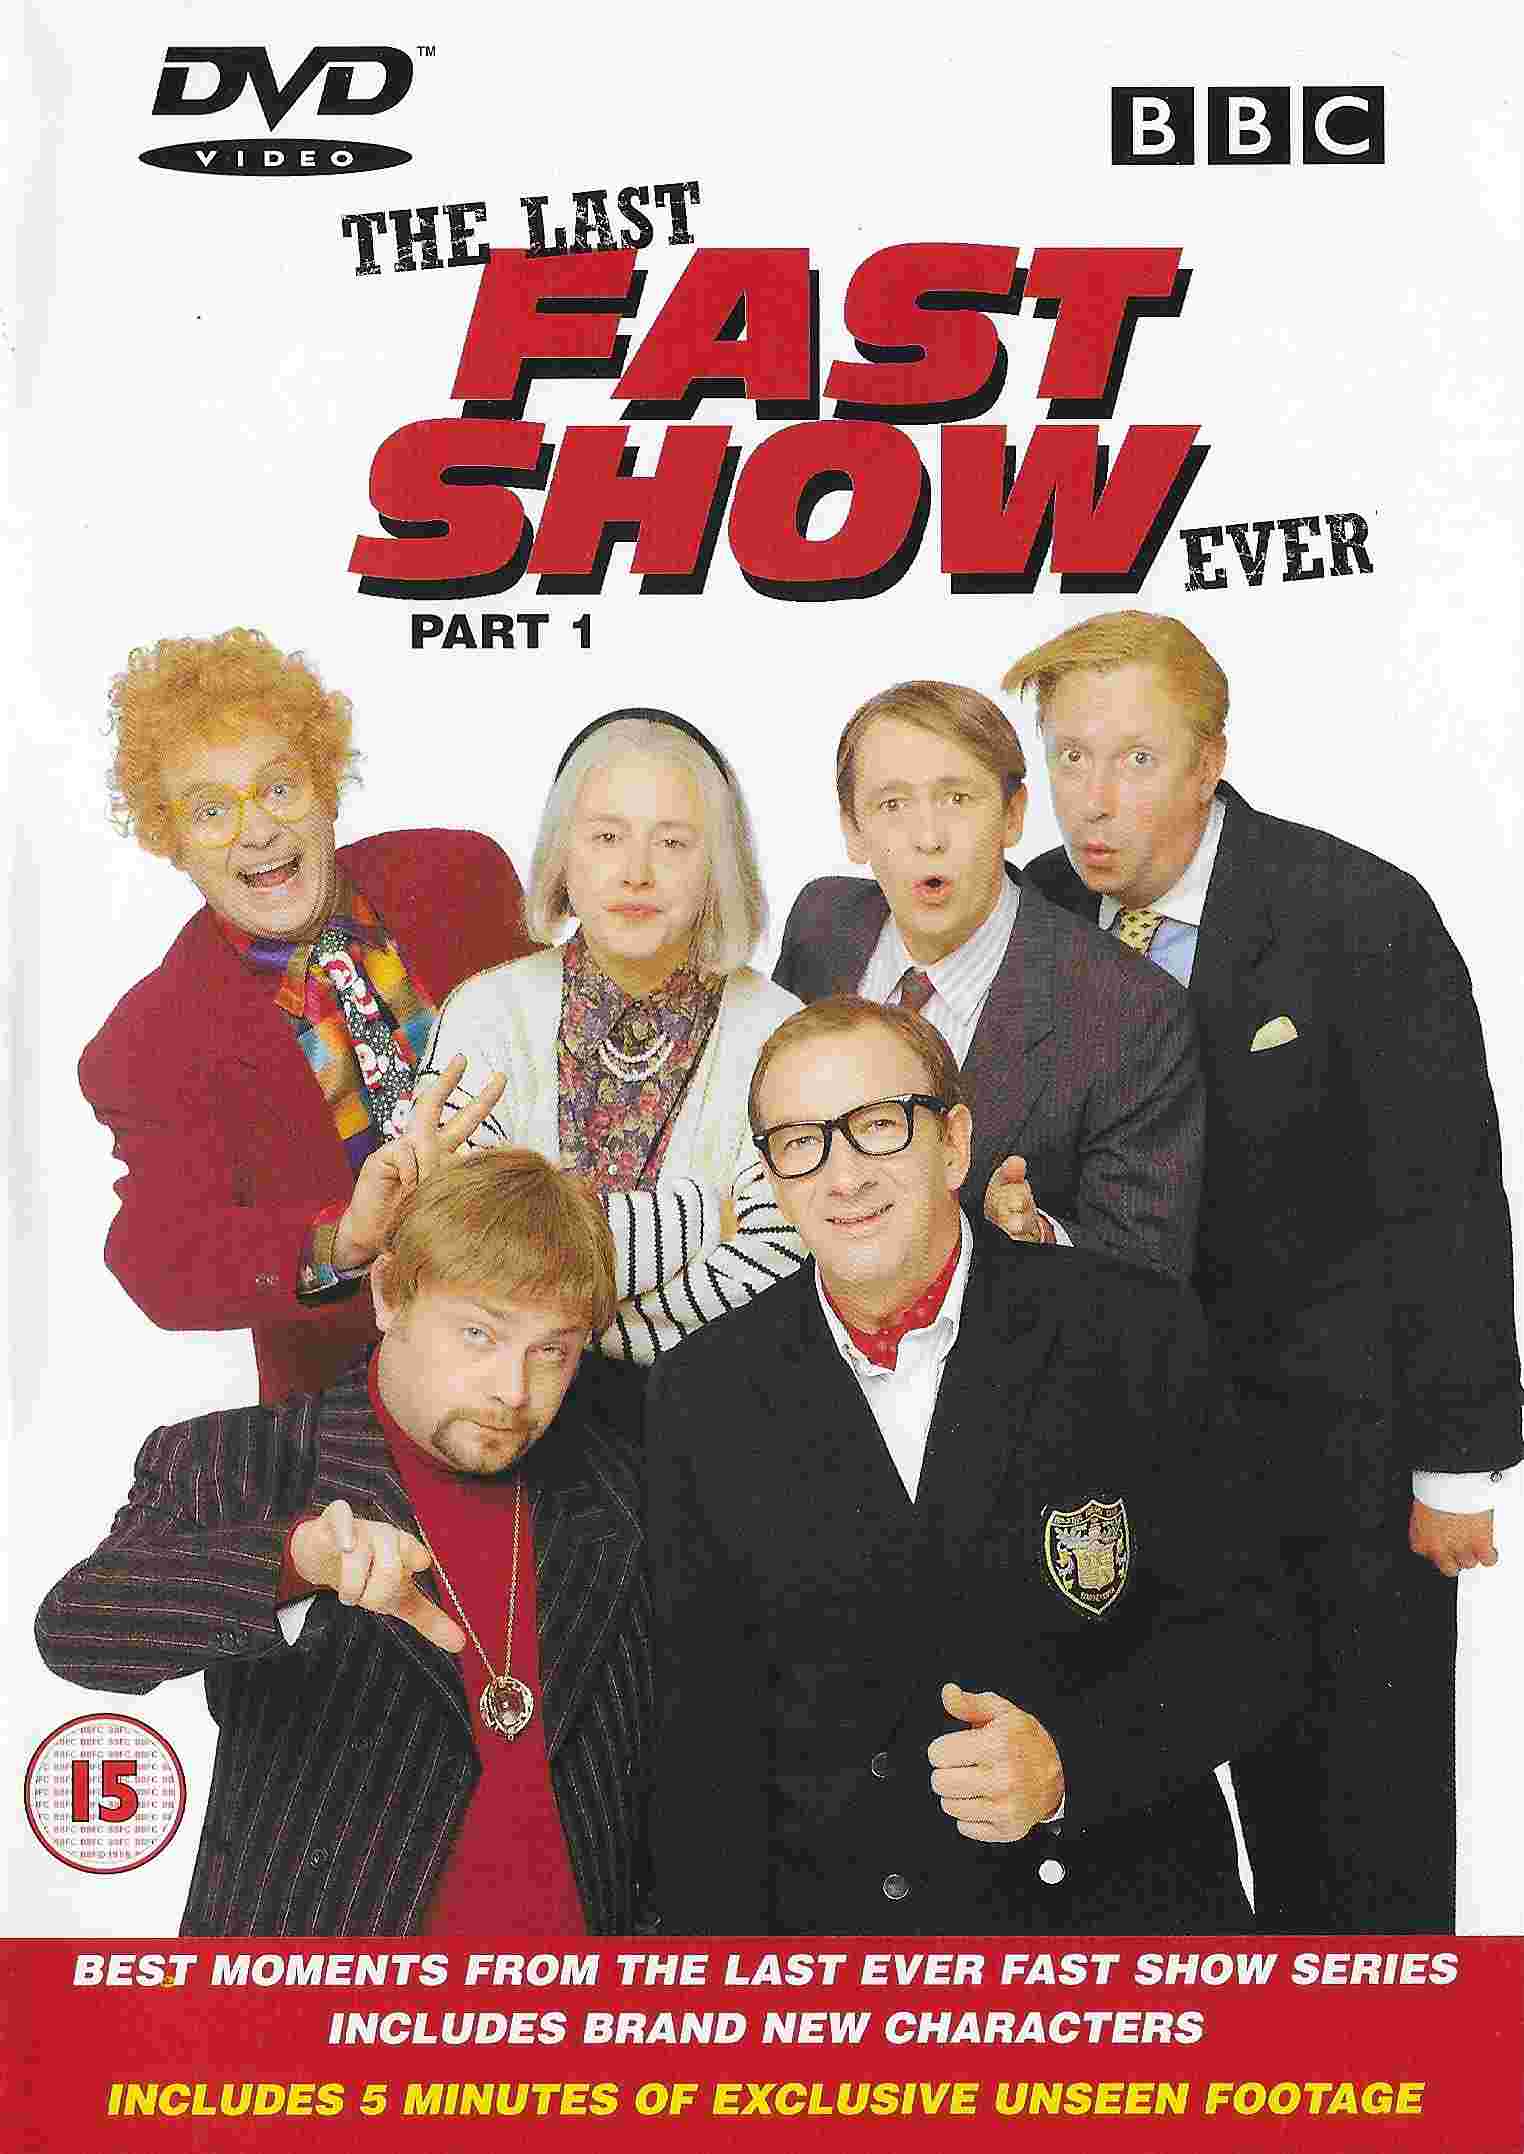 Picture of The last fast show ever - Part 1 by artist Paul Whitehouse / Charlie Higson from the BBC dvds - Records and Tapes library